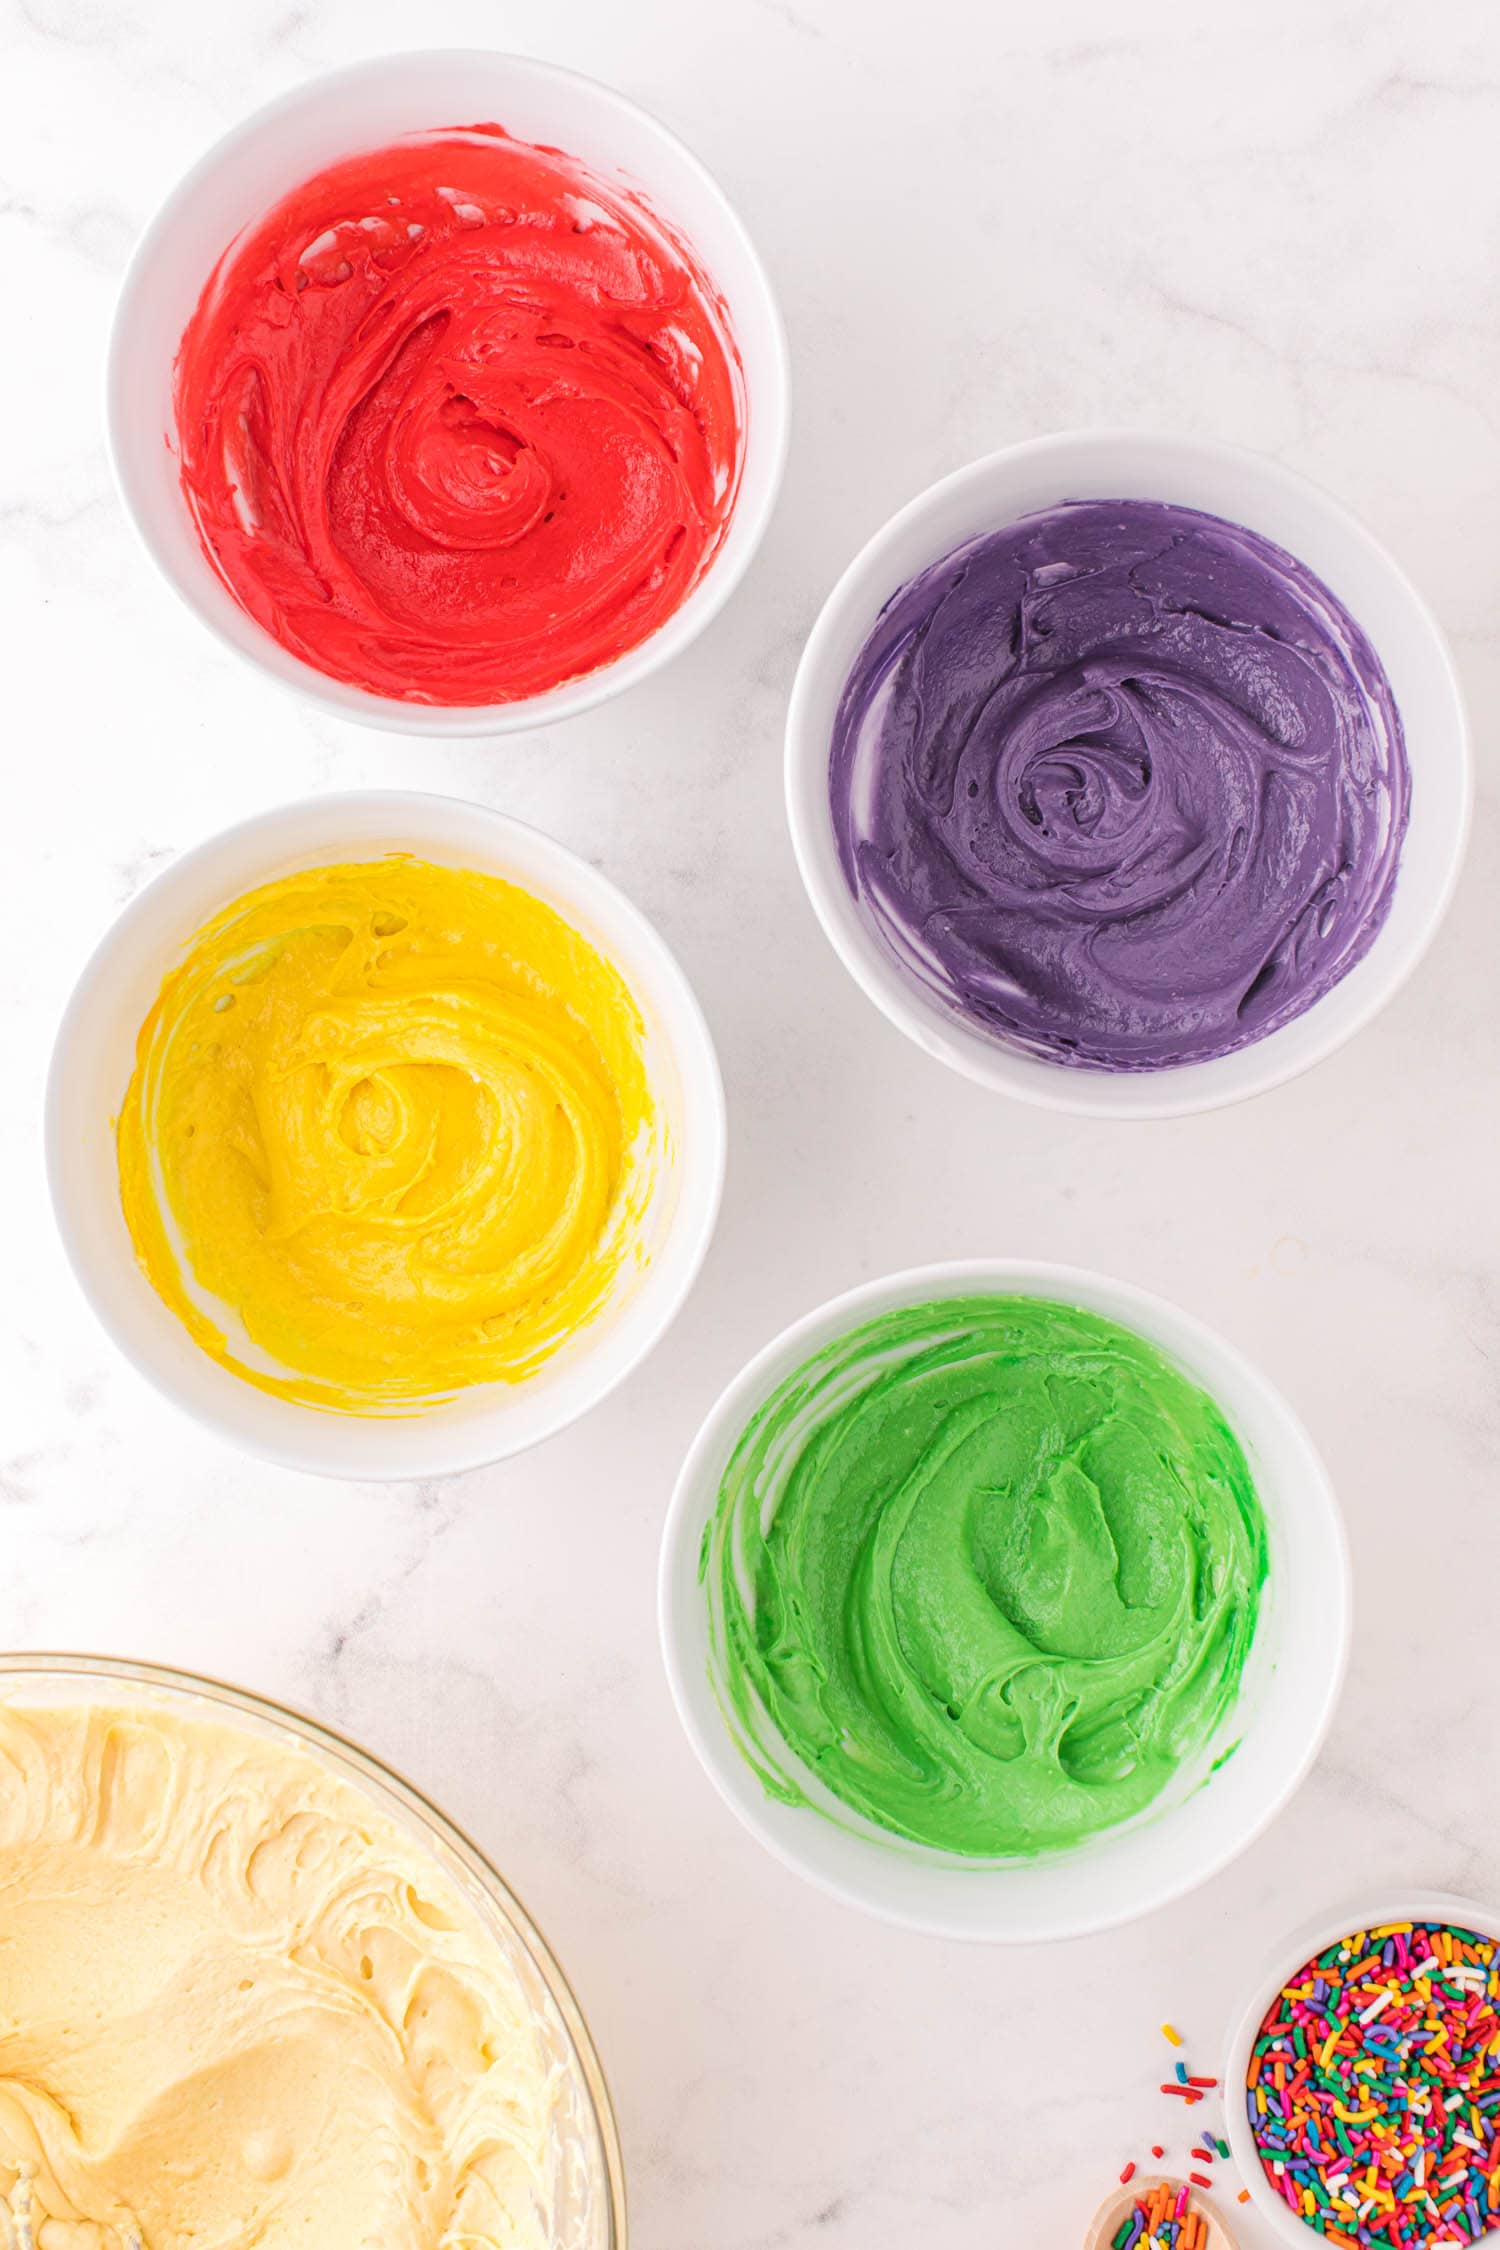 Divide the cake mix into separate bowls and add food coloring